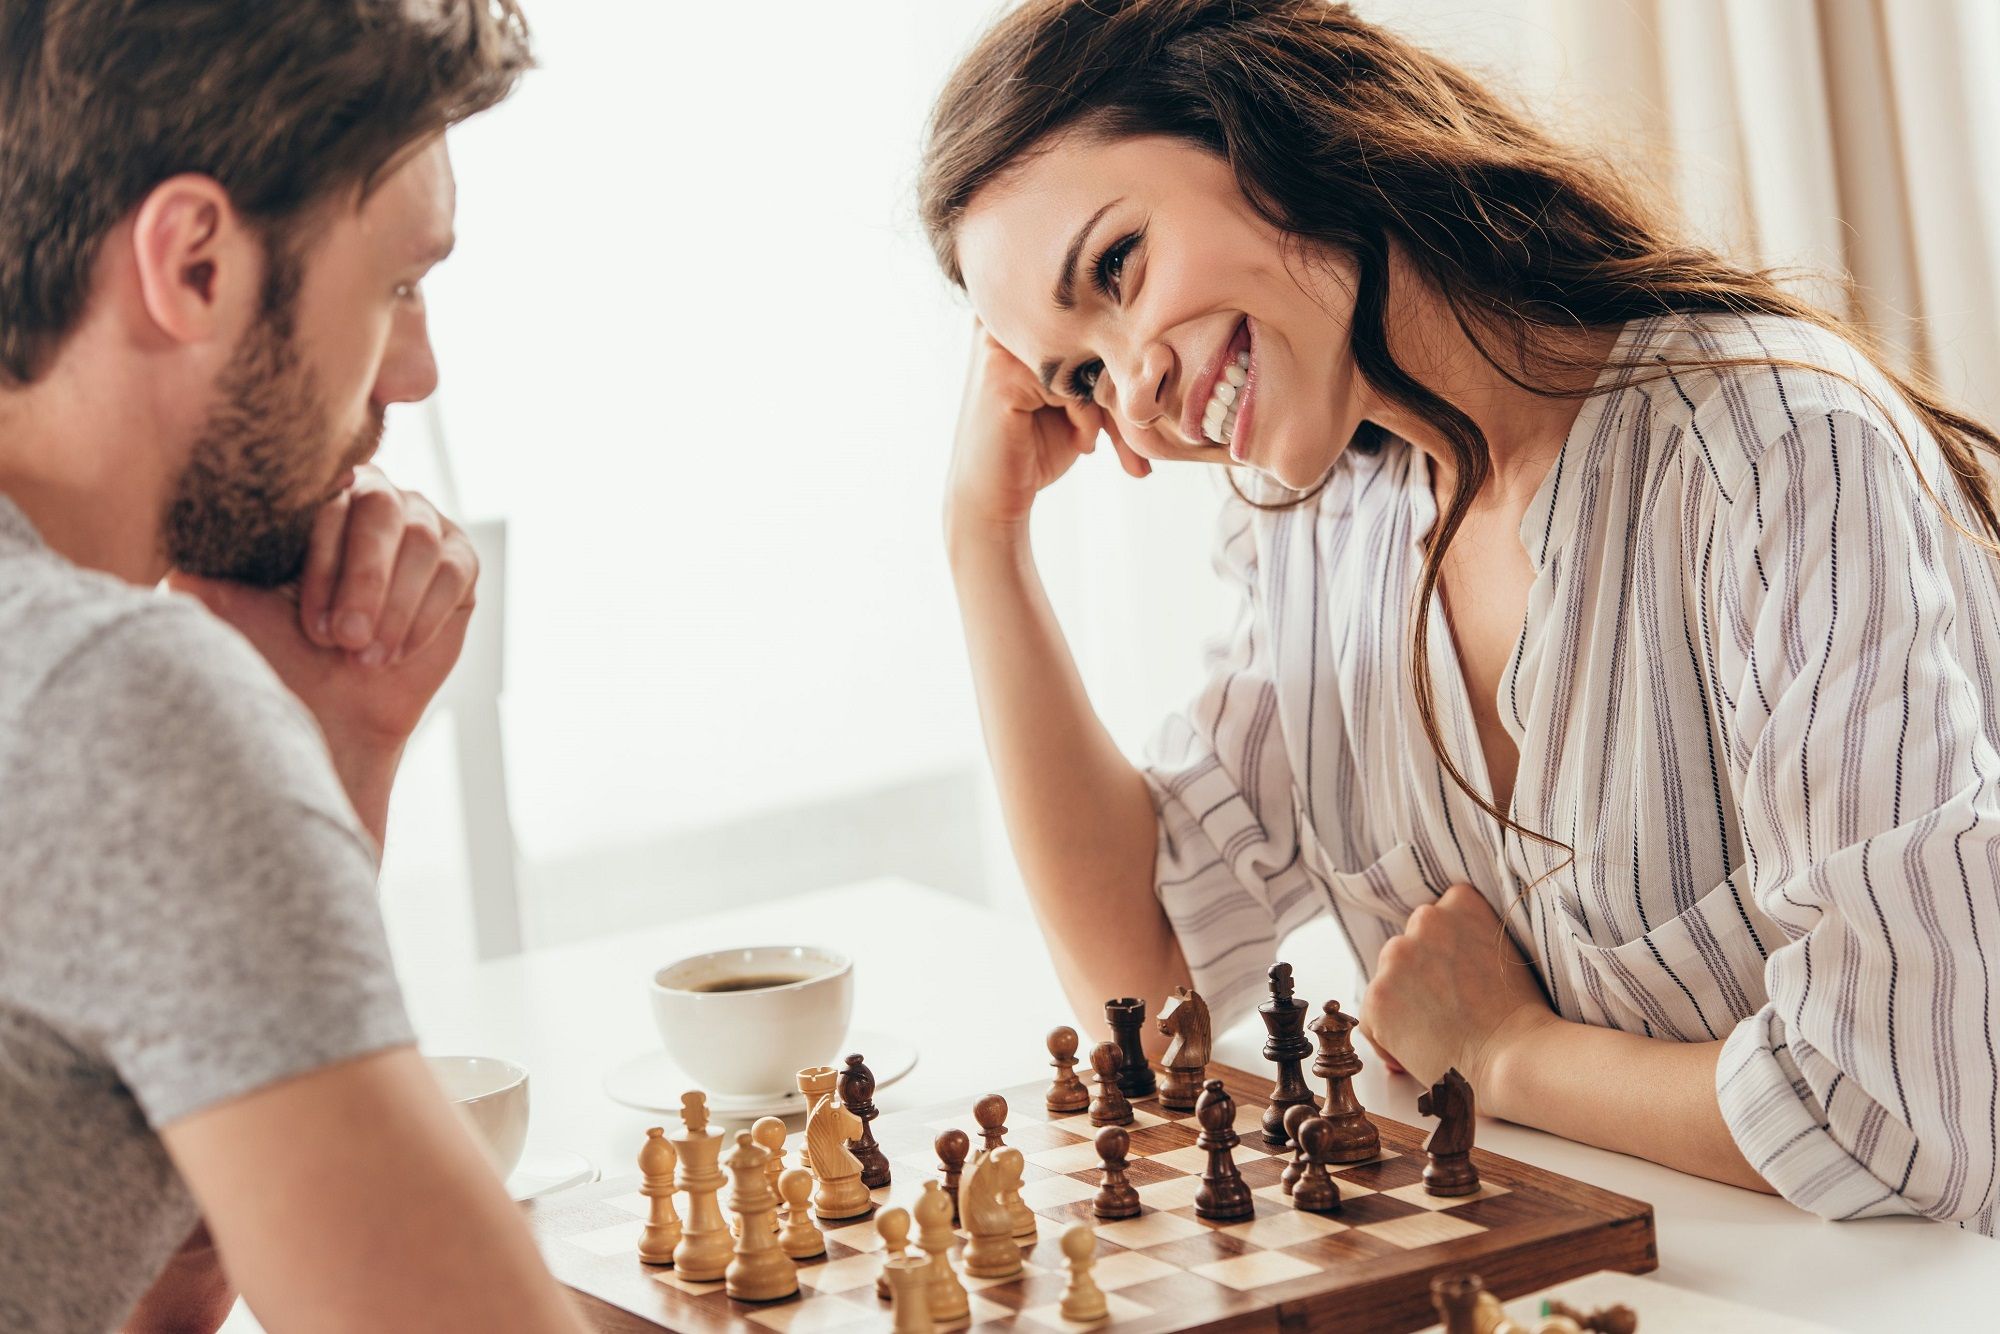 playing-games-can-improve-relationship